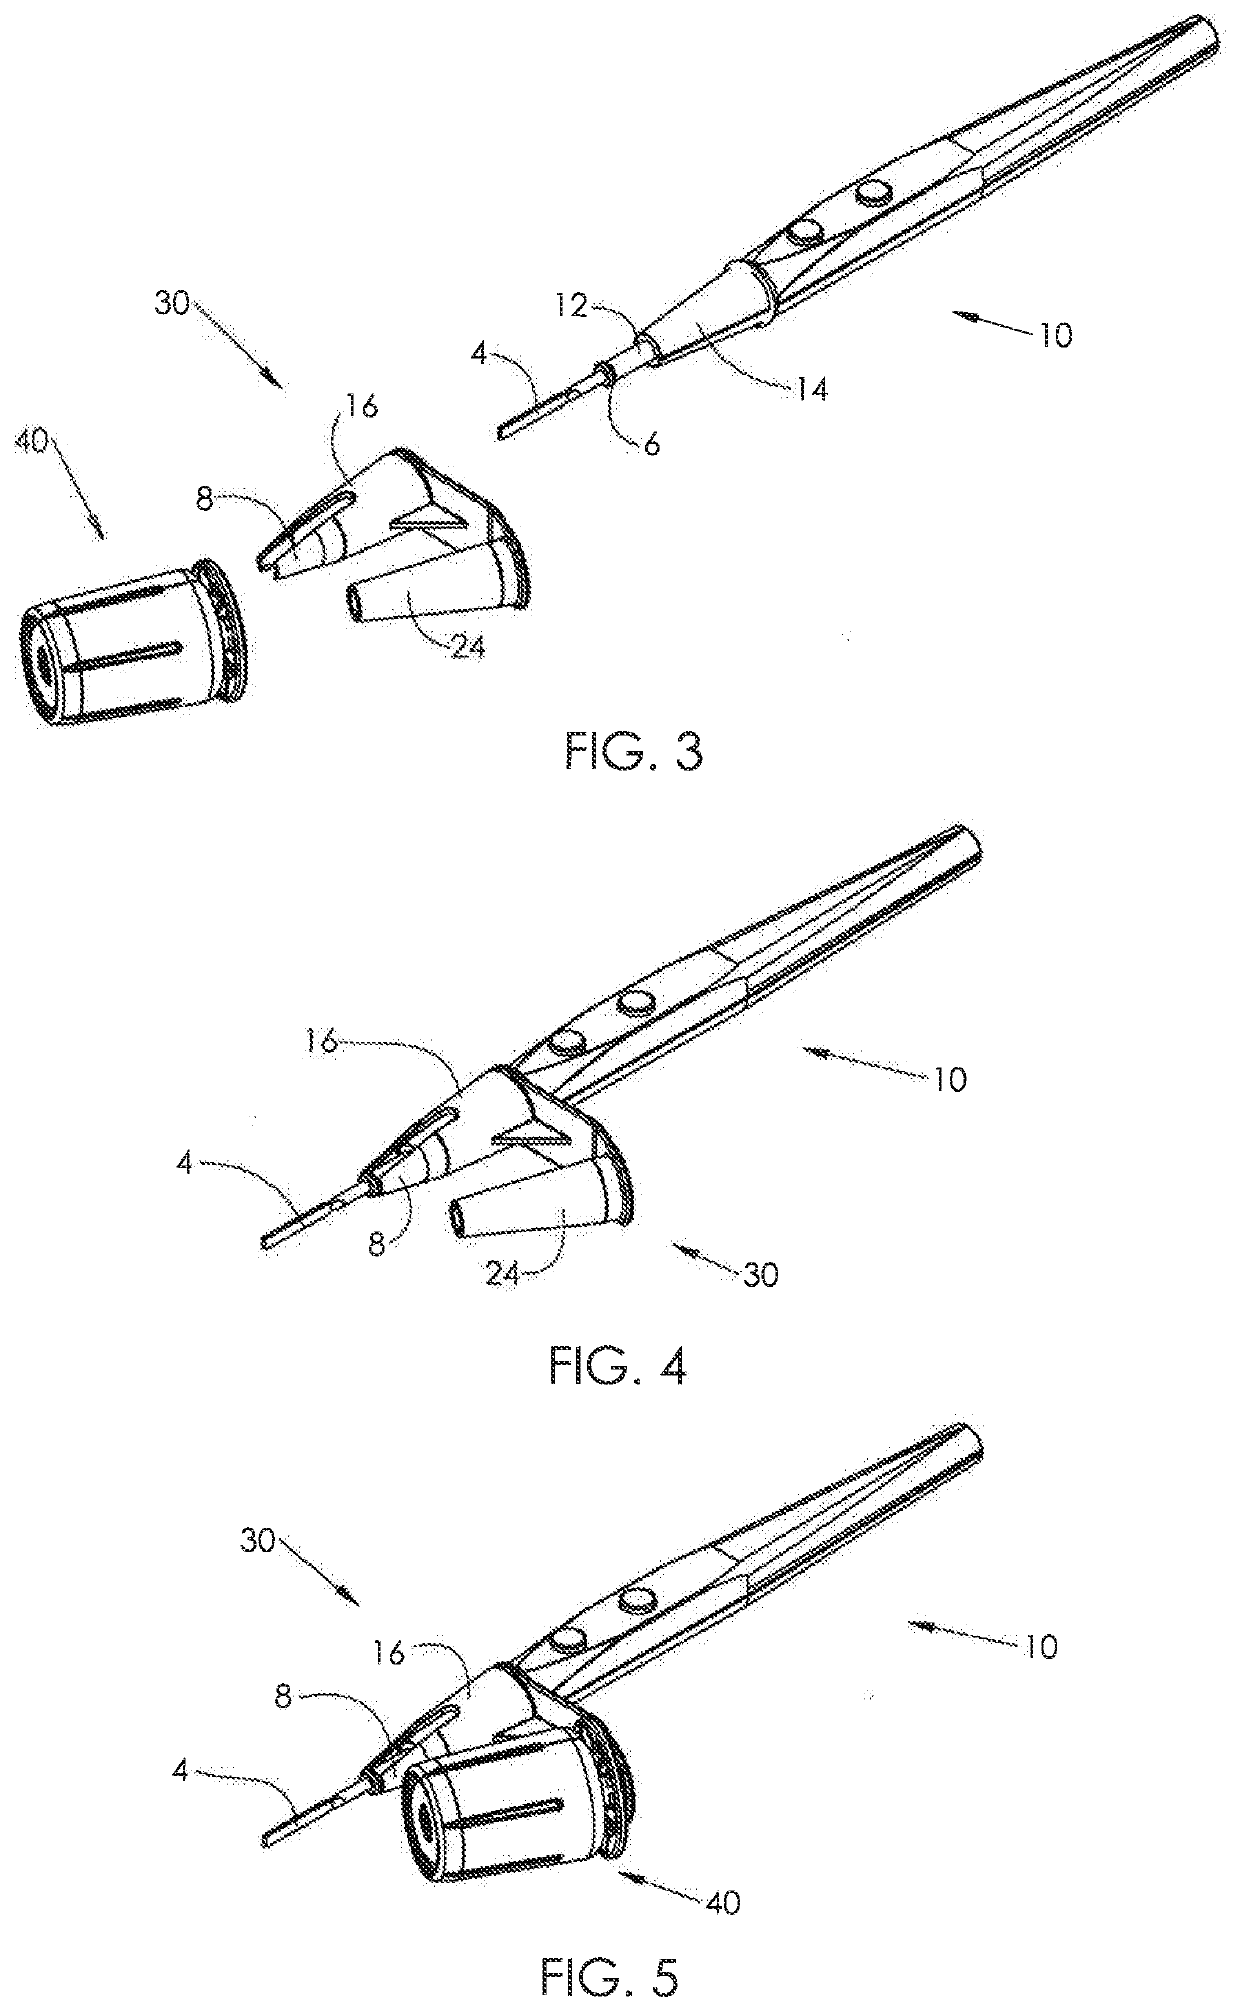 Adapter assembly for attaching a lighting device to a handheld electrosurgical instrument